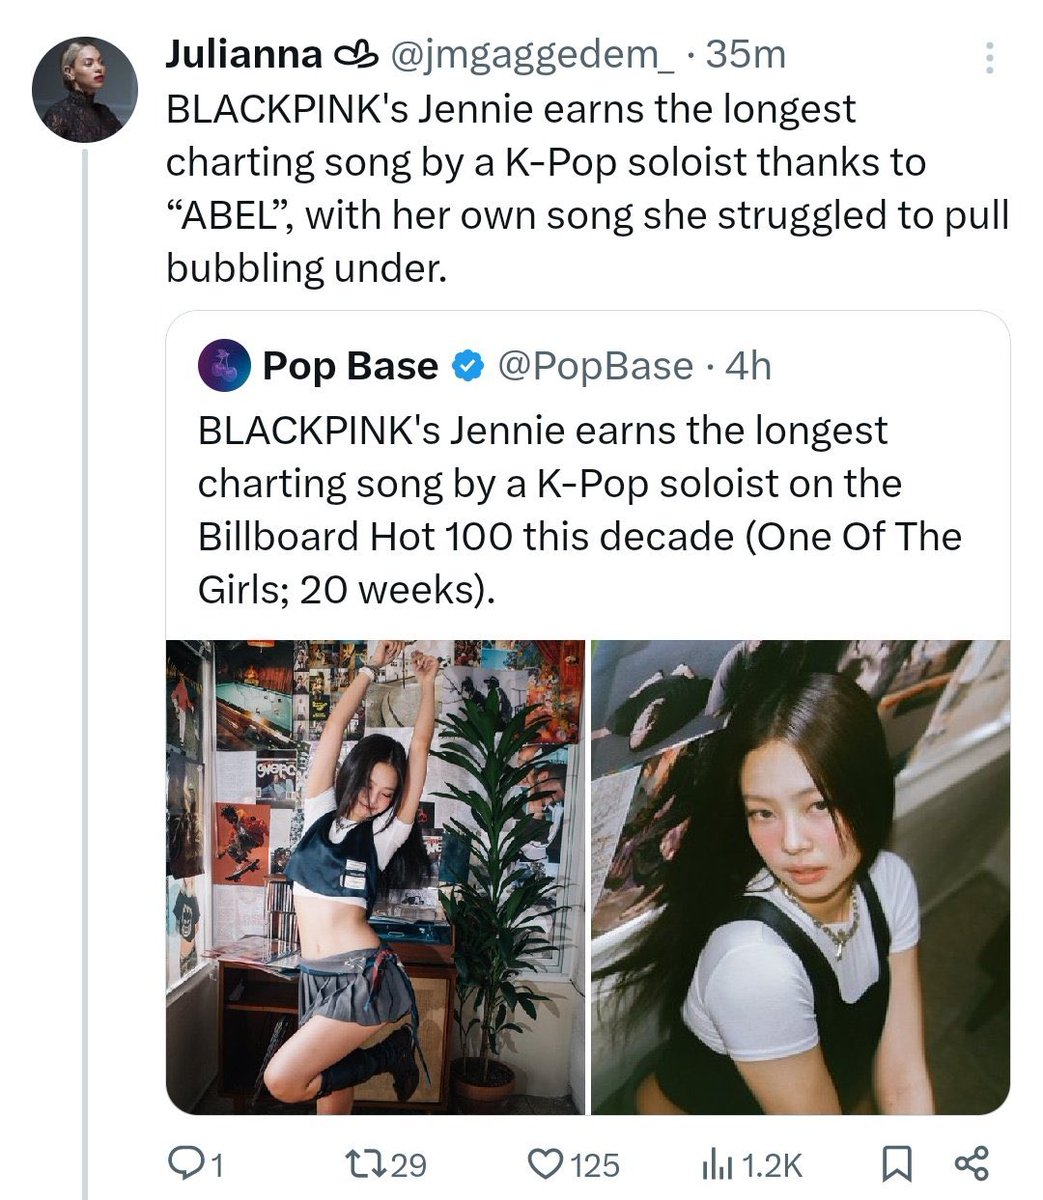 the focus is on jennie so ofc he’ll flop